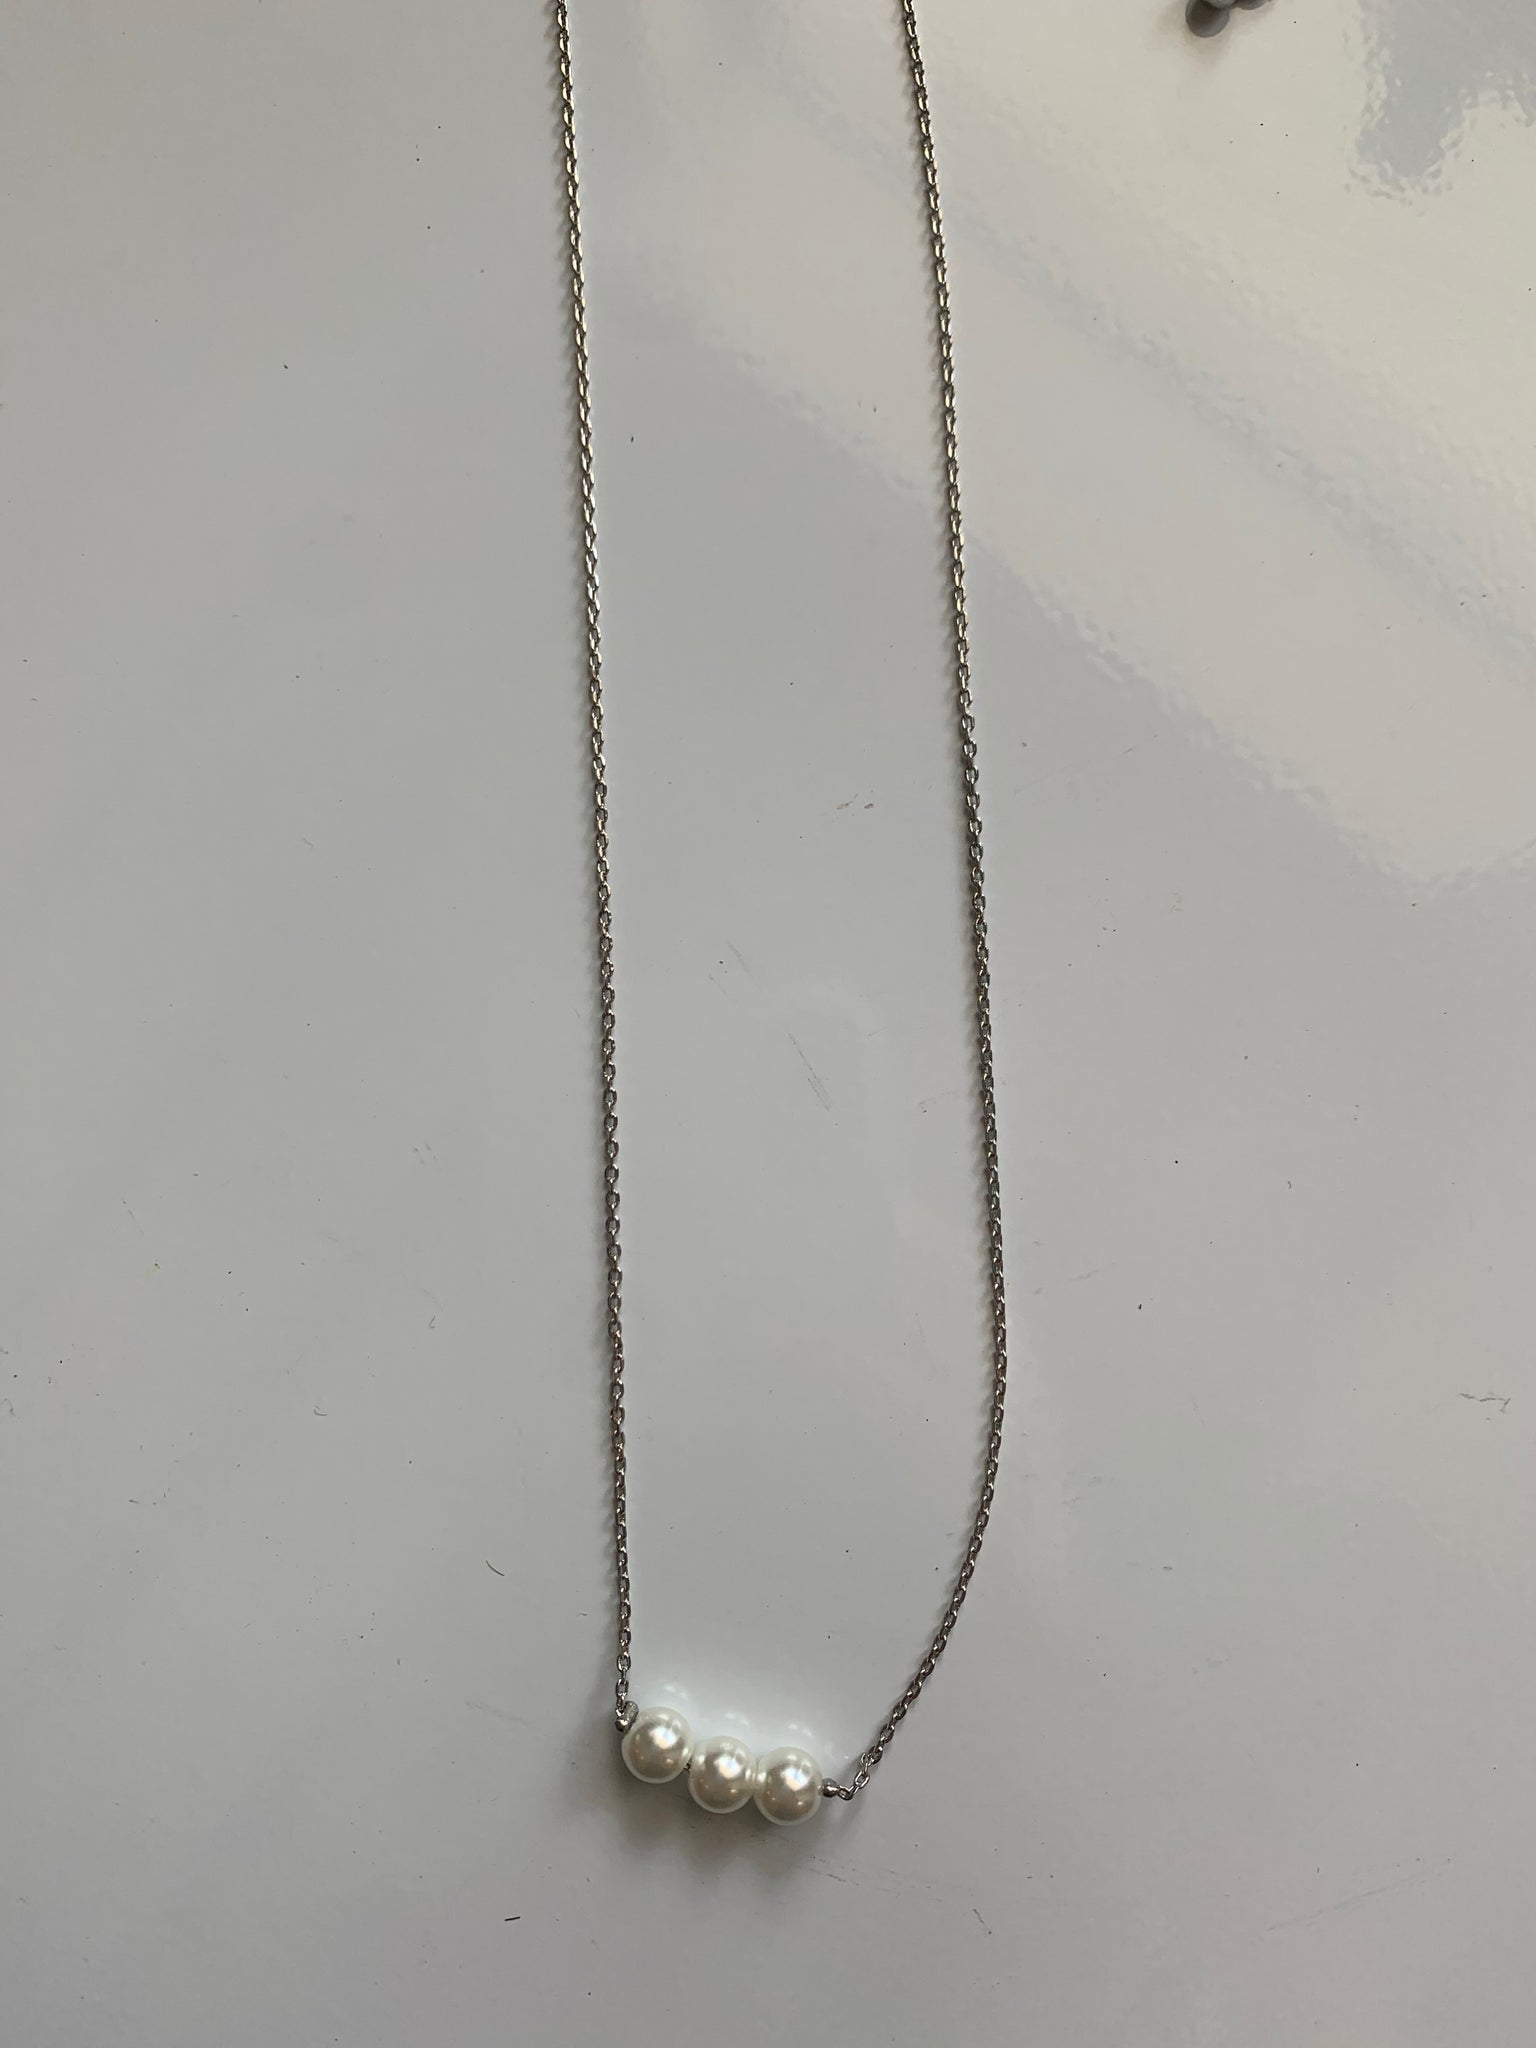 Silver 3 pearl necklace